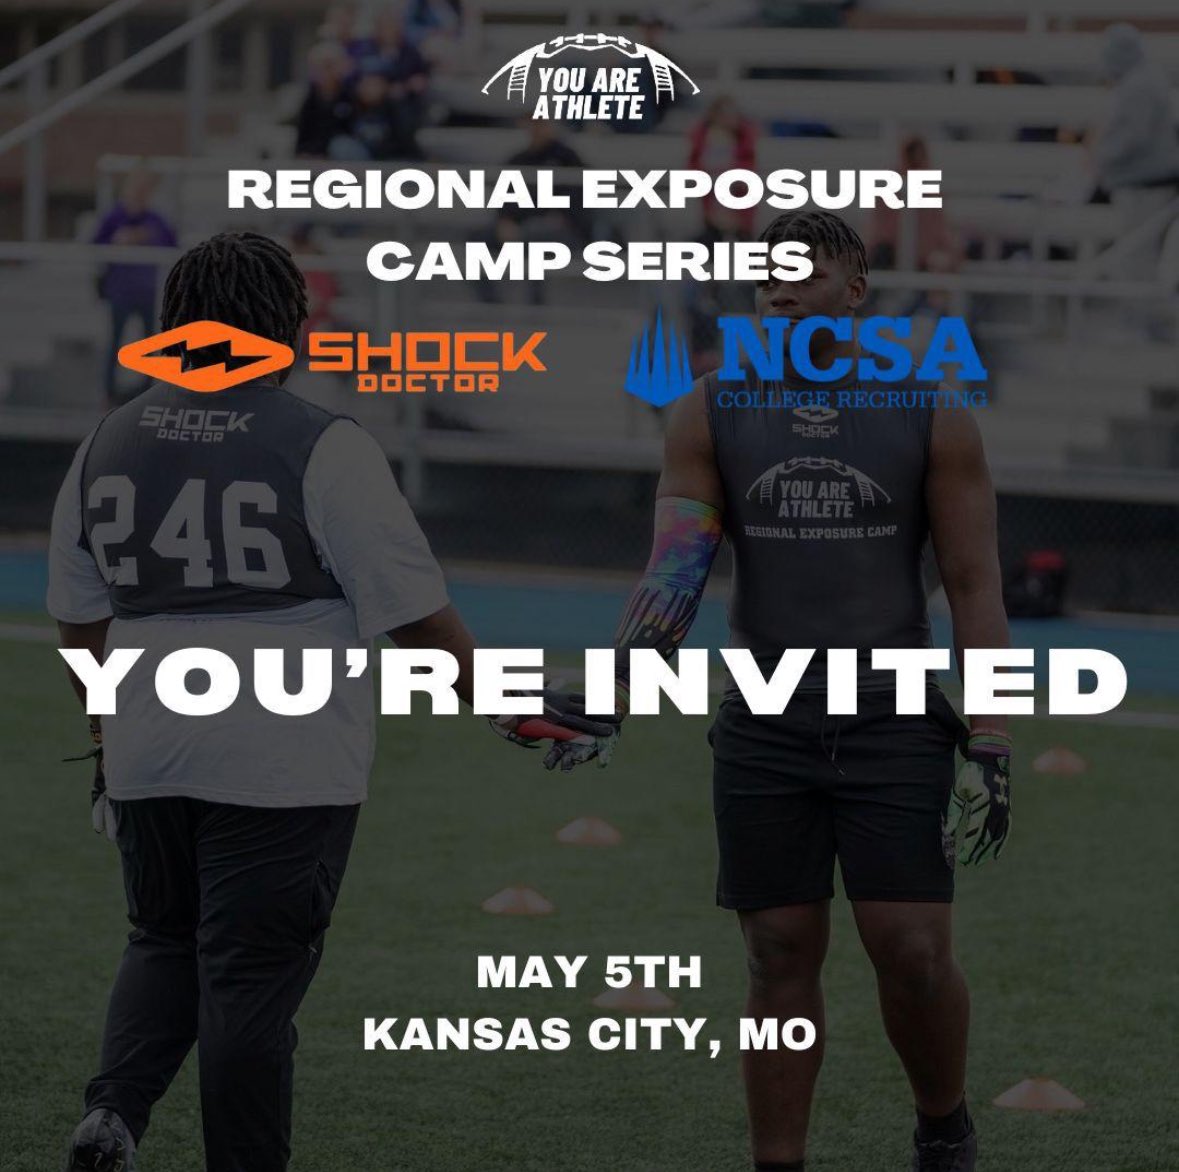 Thanks for the invite!! @youareathlete @GriffFootball